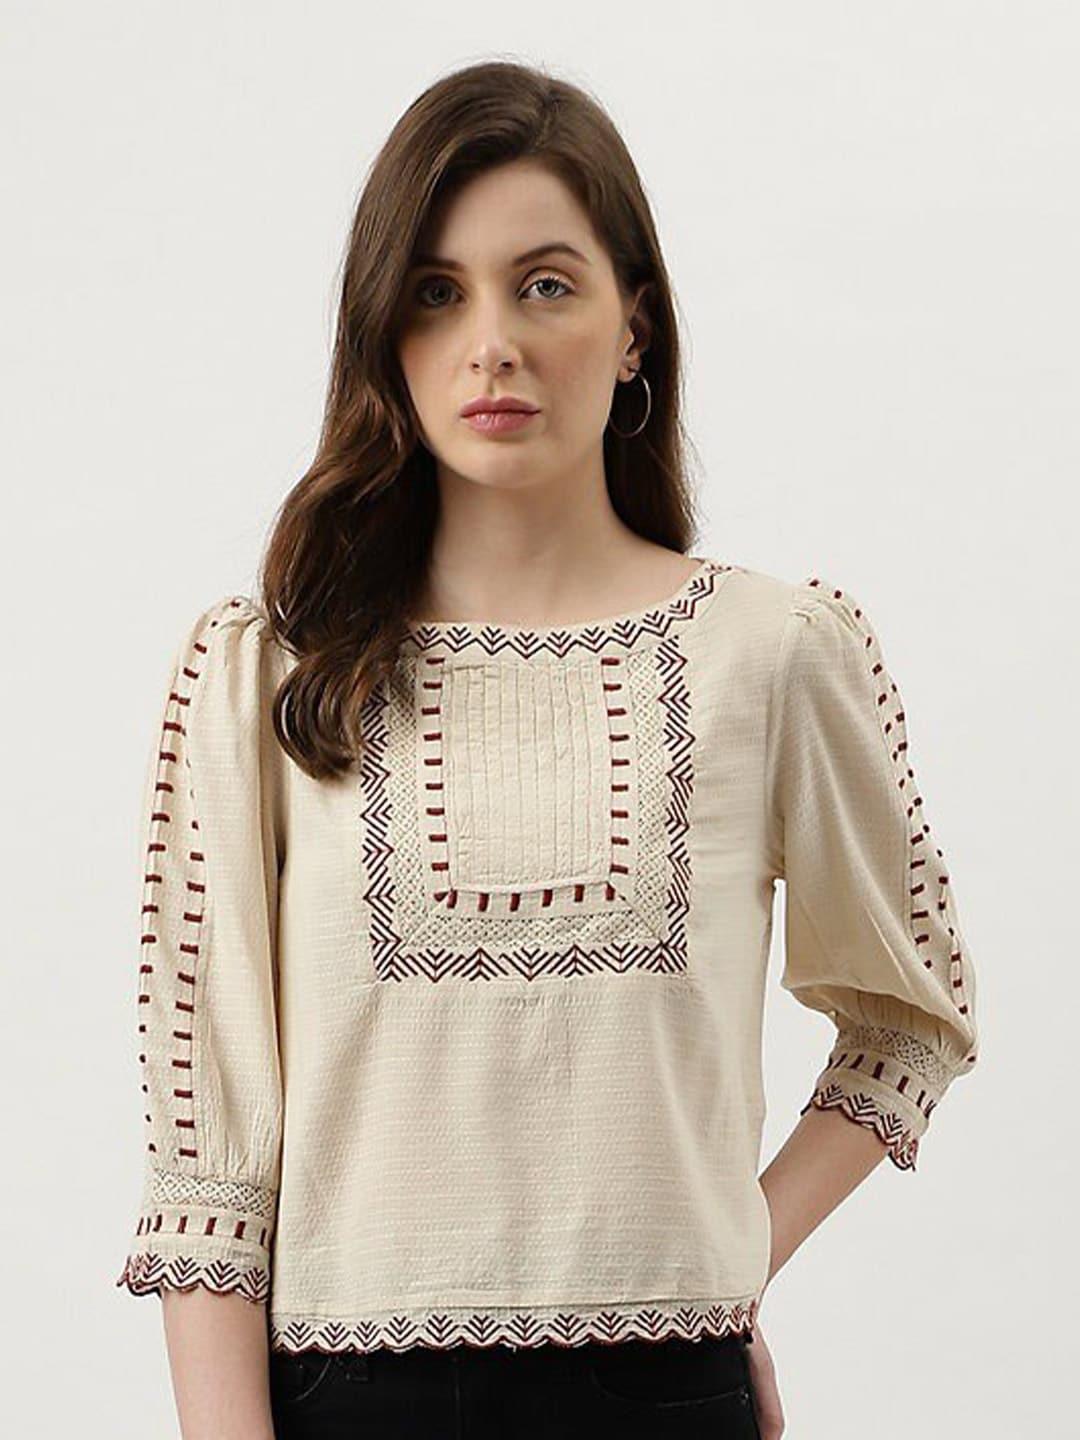 marks & spencer embroidered round neck three-quarter sleeves casual top